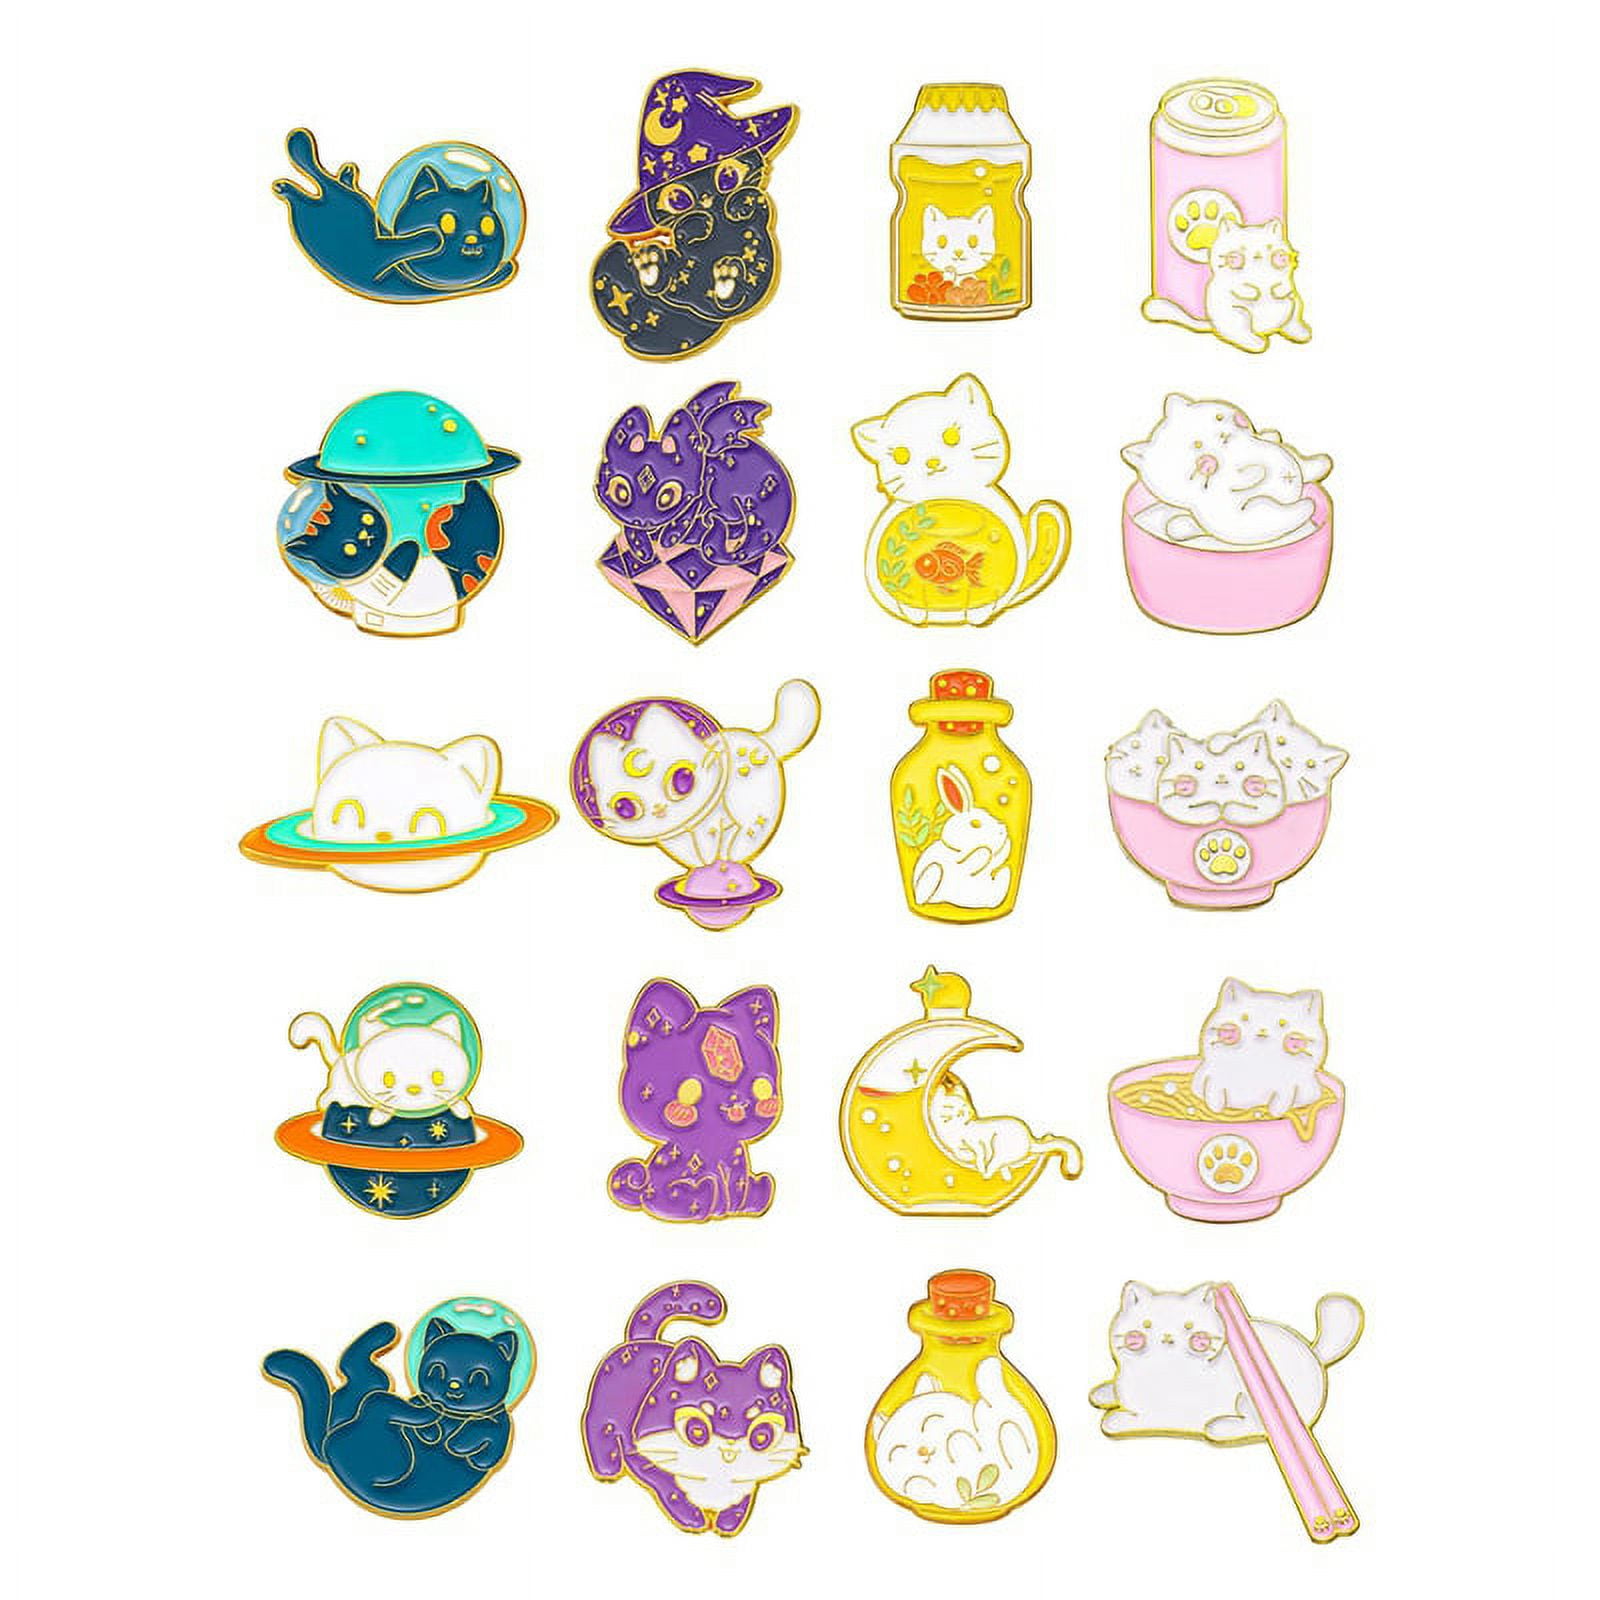 20 Kawall and Cute Pins to Add With Your Collection